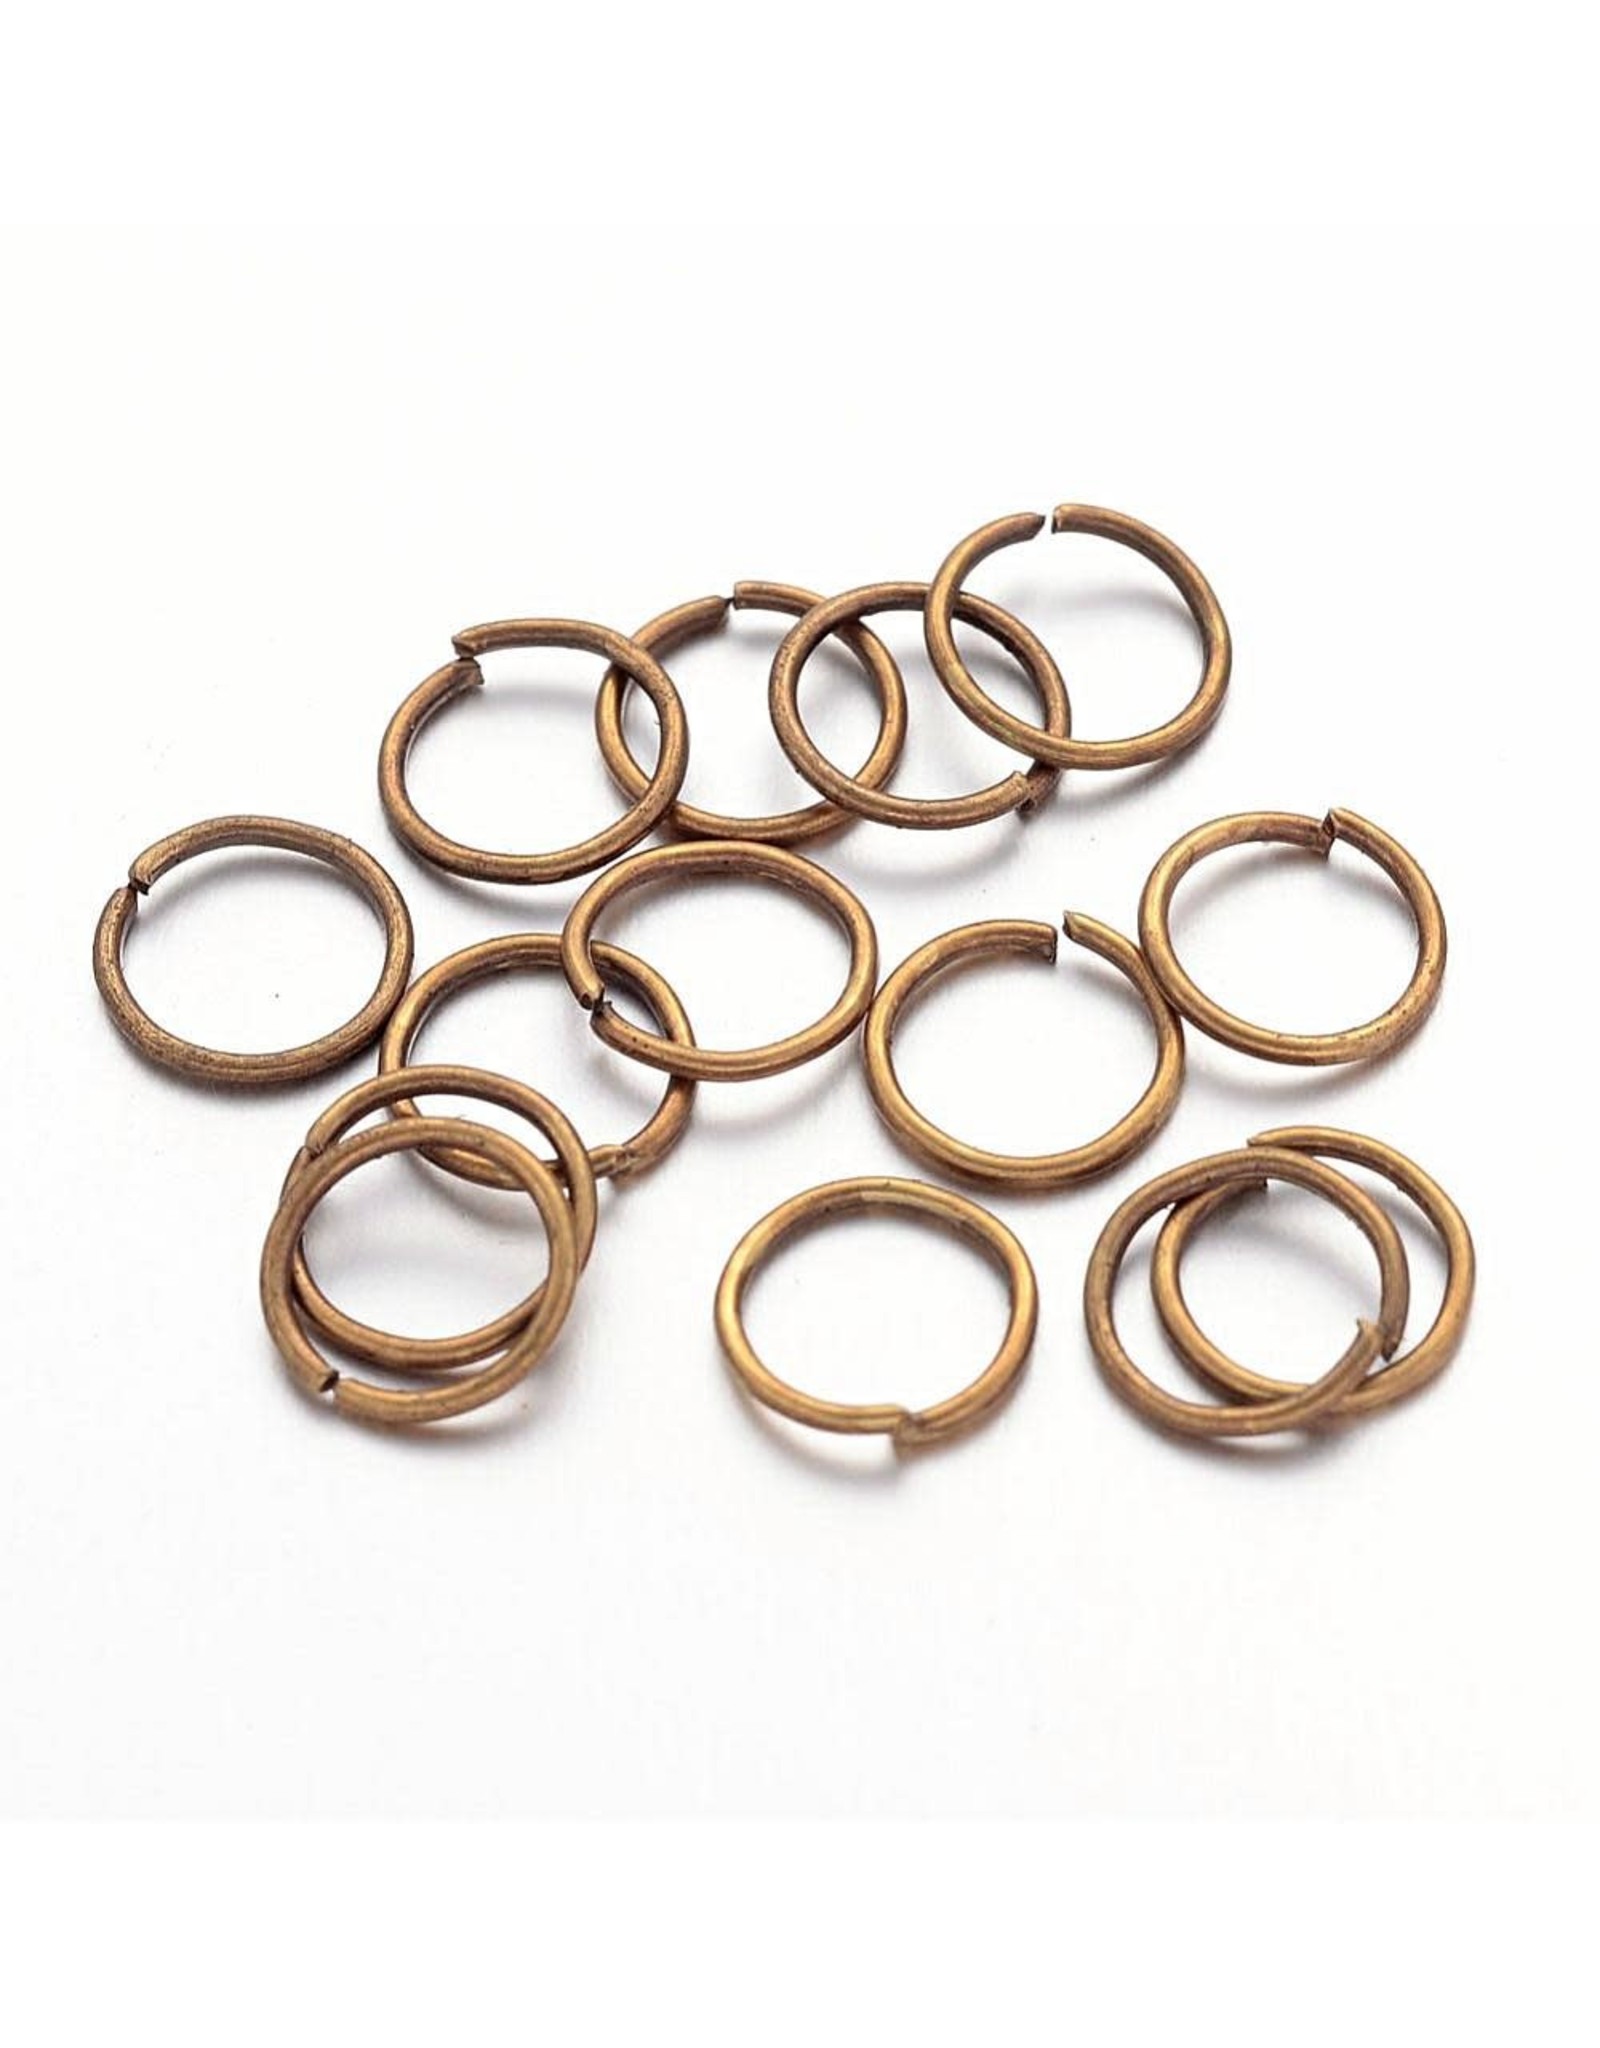 Jump Ring 7mm Antique Brass  approx 20g  x100 NF